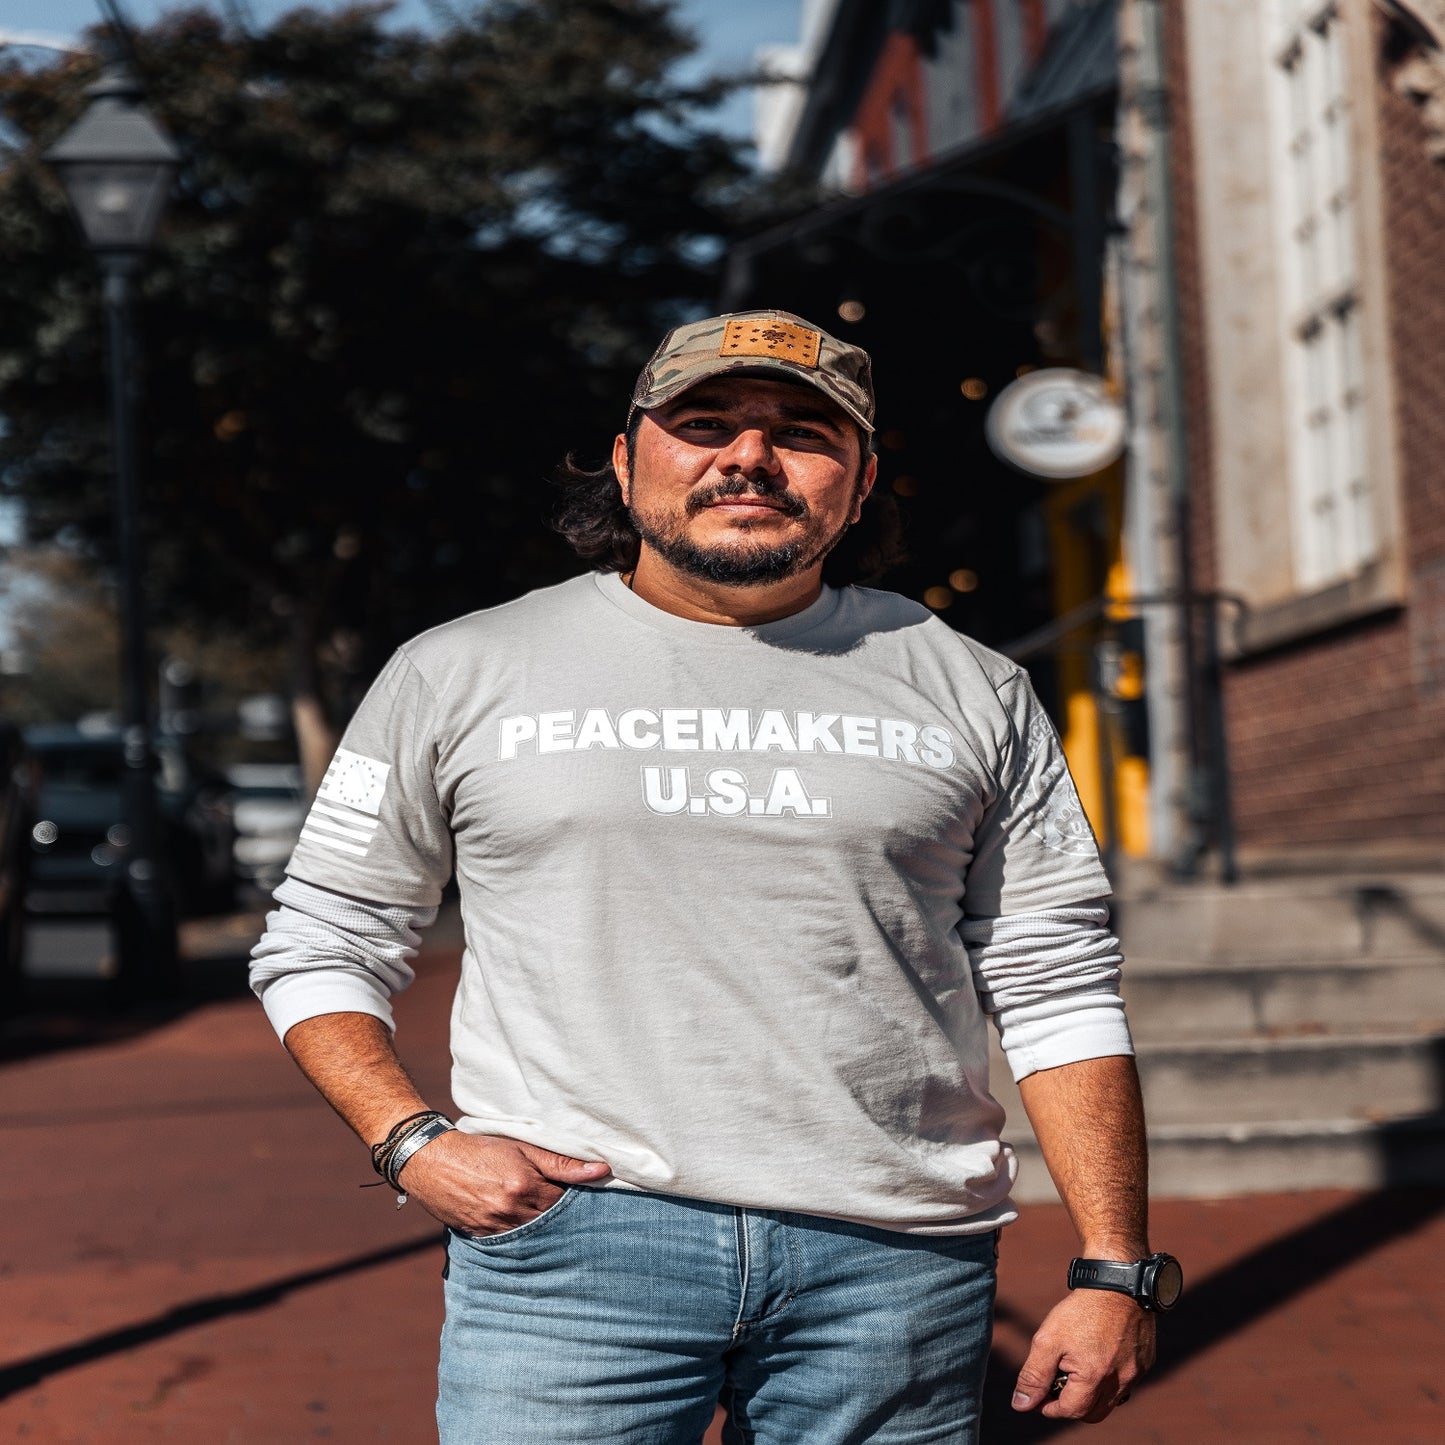 PEACEMAKERS USA Authentic Military-Inspired T-Shirts by US Veterans - (Sand)